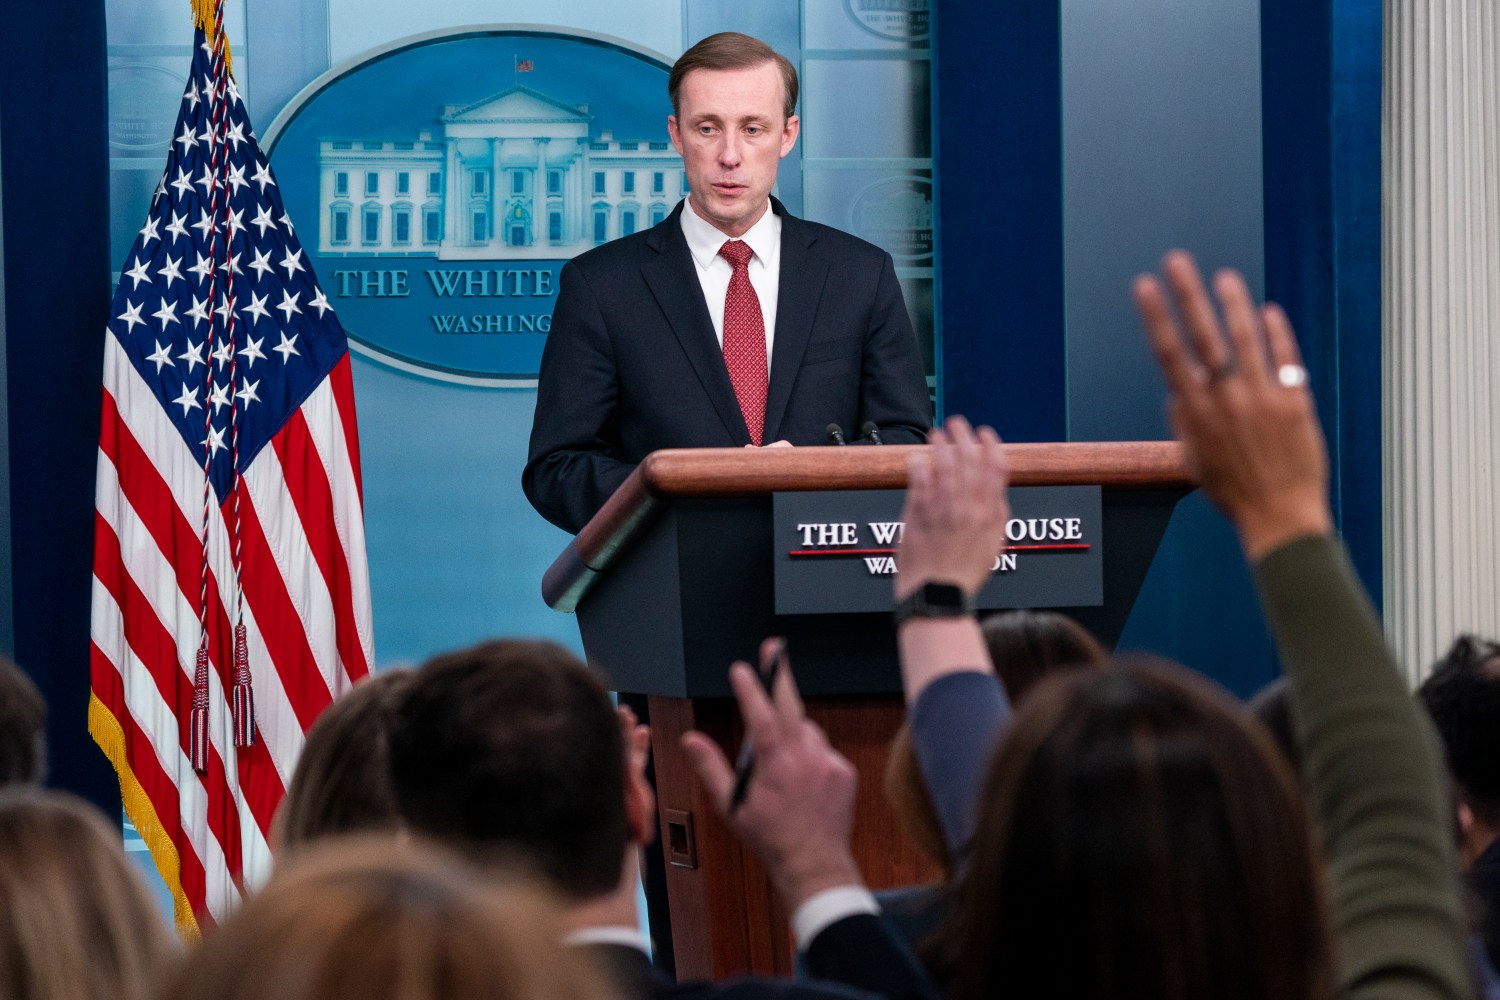 National Security Advisor Jake Sullivan responds to questions from the news media during the daily press briefing at the White House in Washington, DC, USA, 11 February 2022. Sullivan responded to questions about reports of an imminent invasion of Ukraine by Russia. Sipa USA